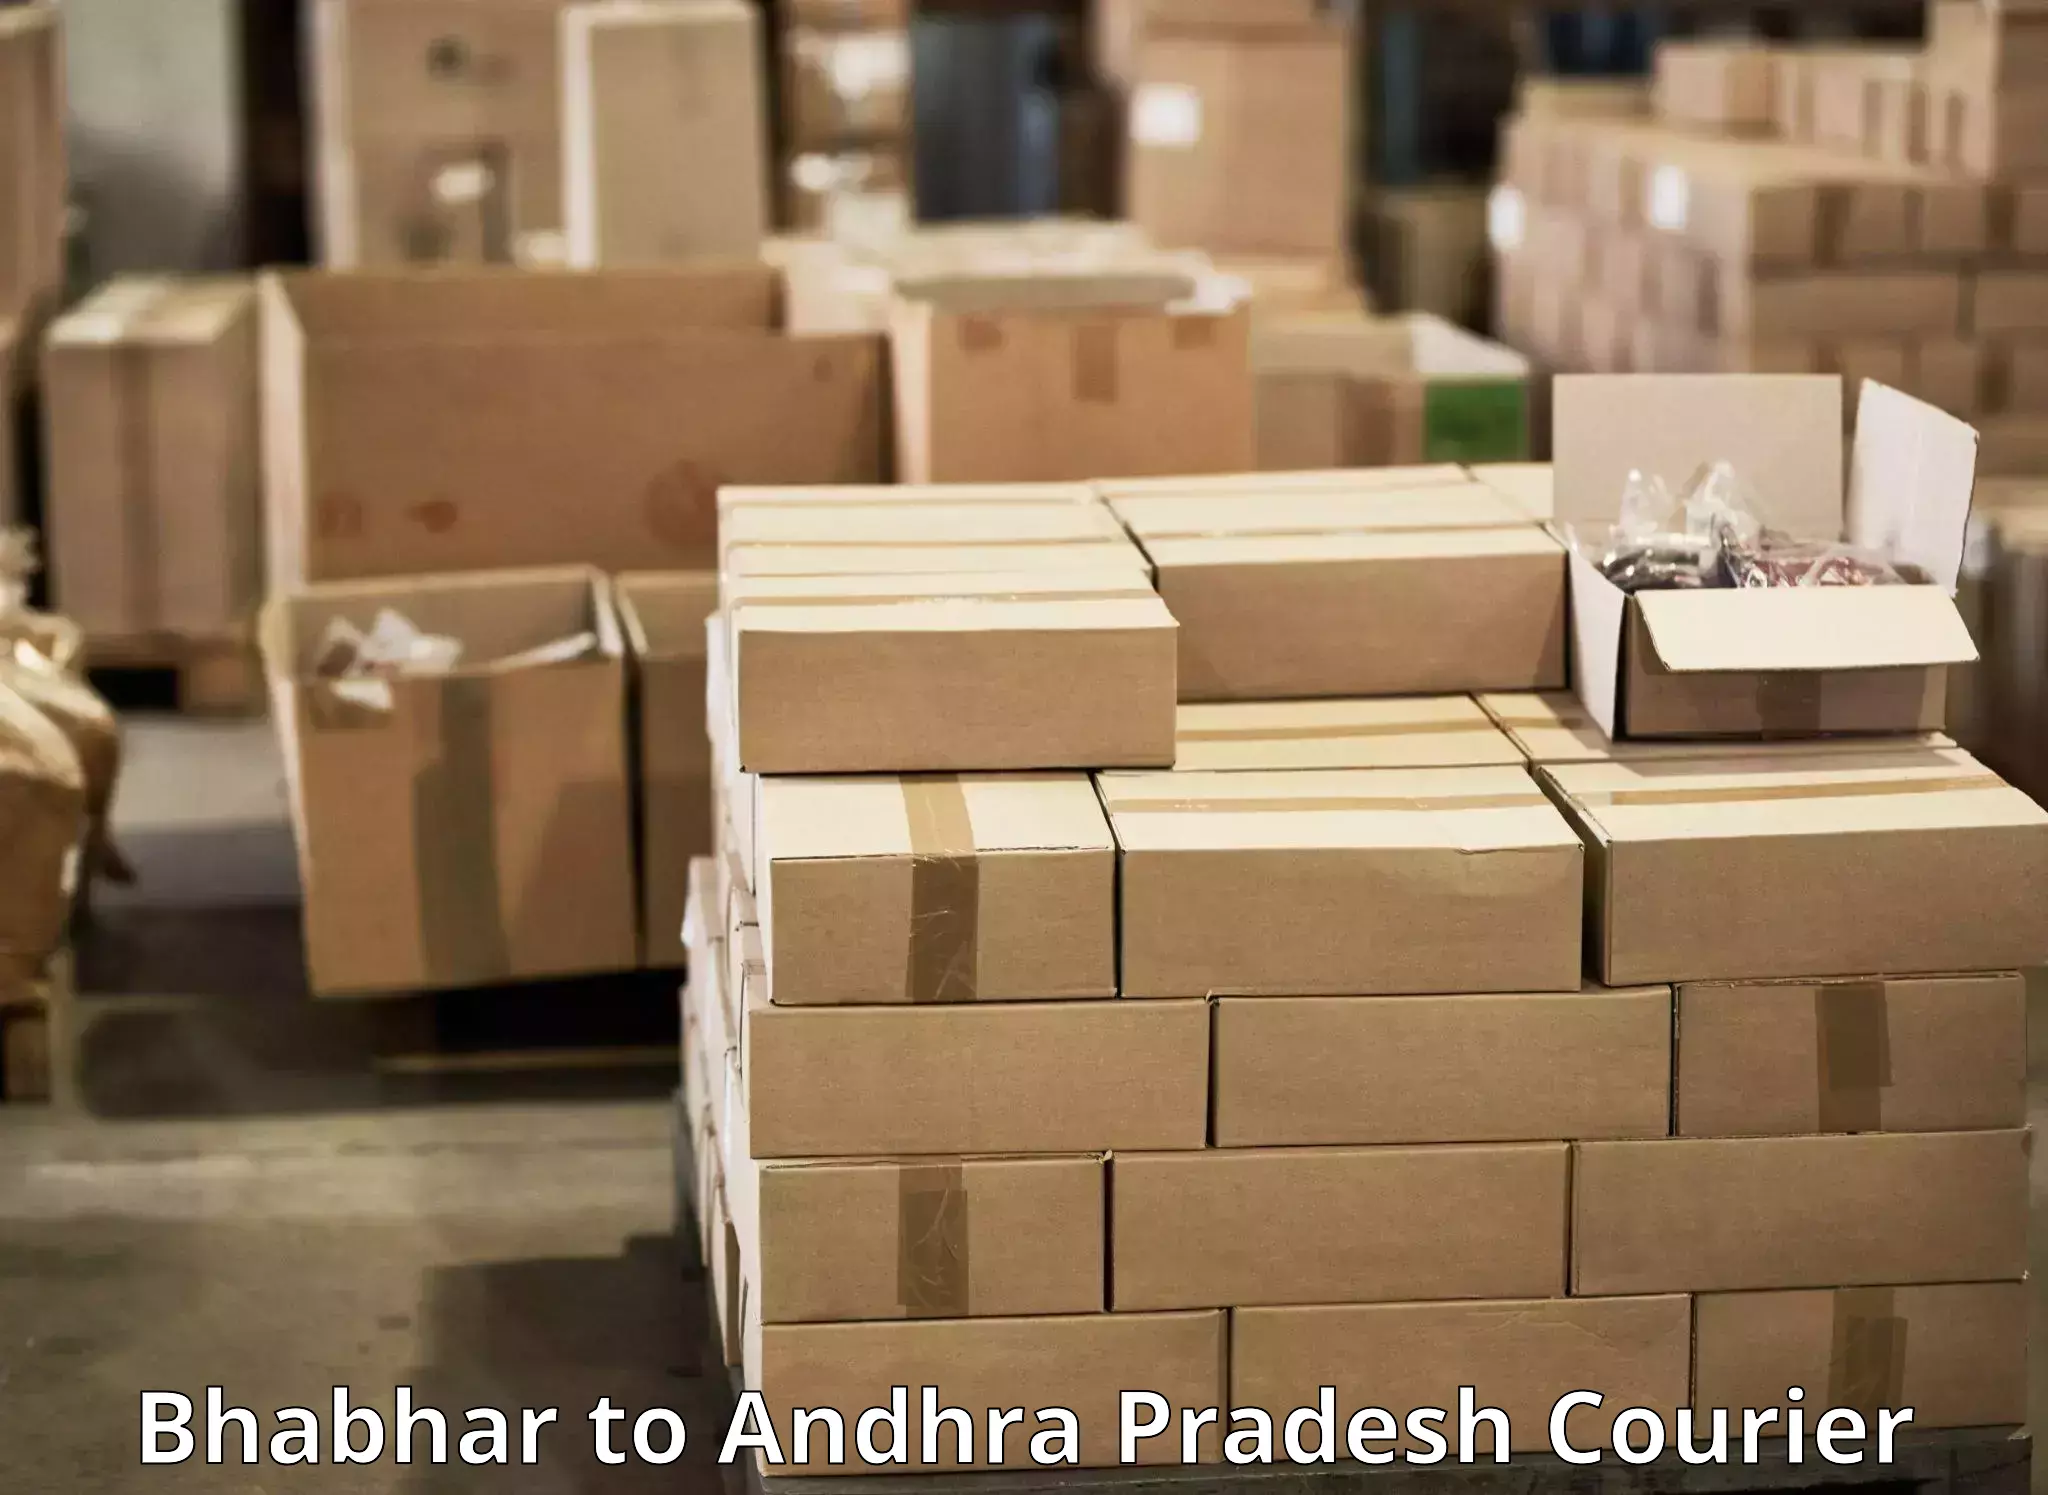 Express courier capabilities Bhabhar to Chittoor